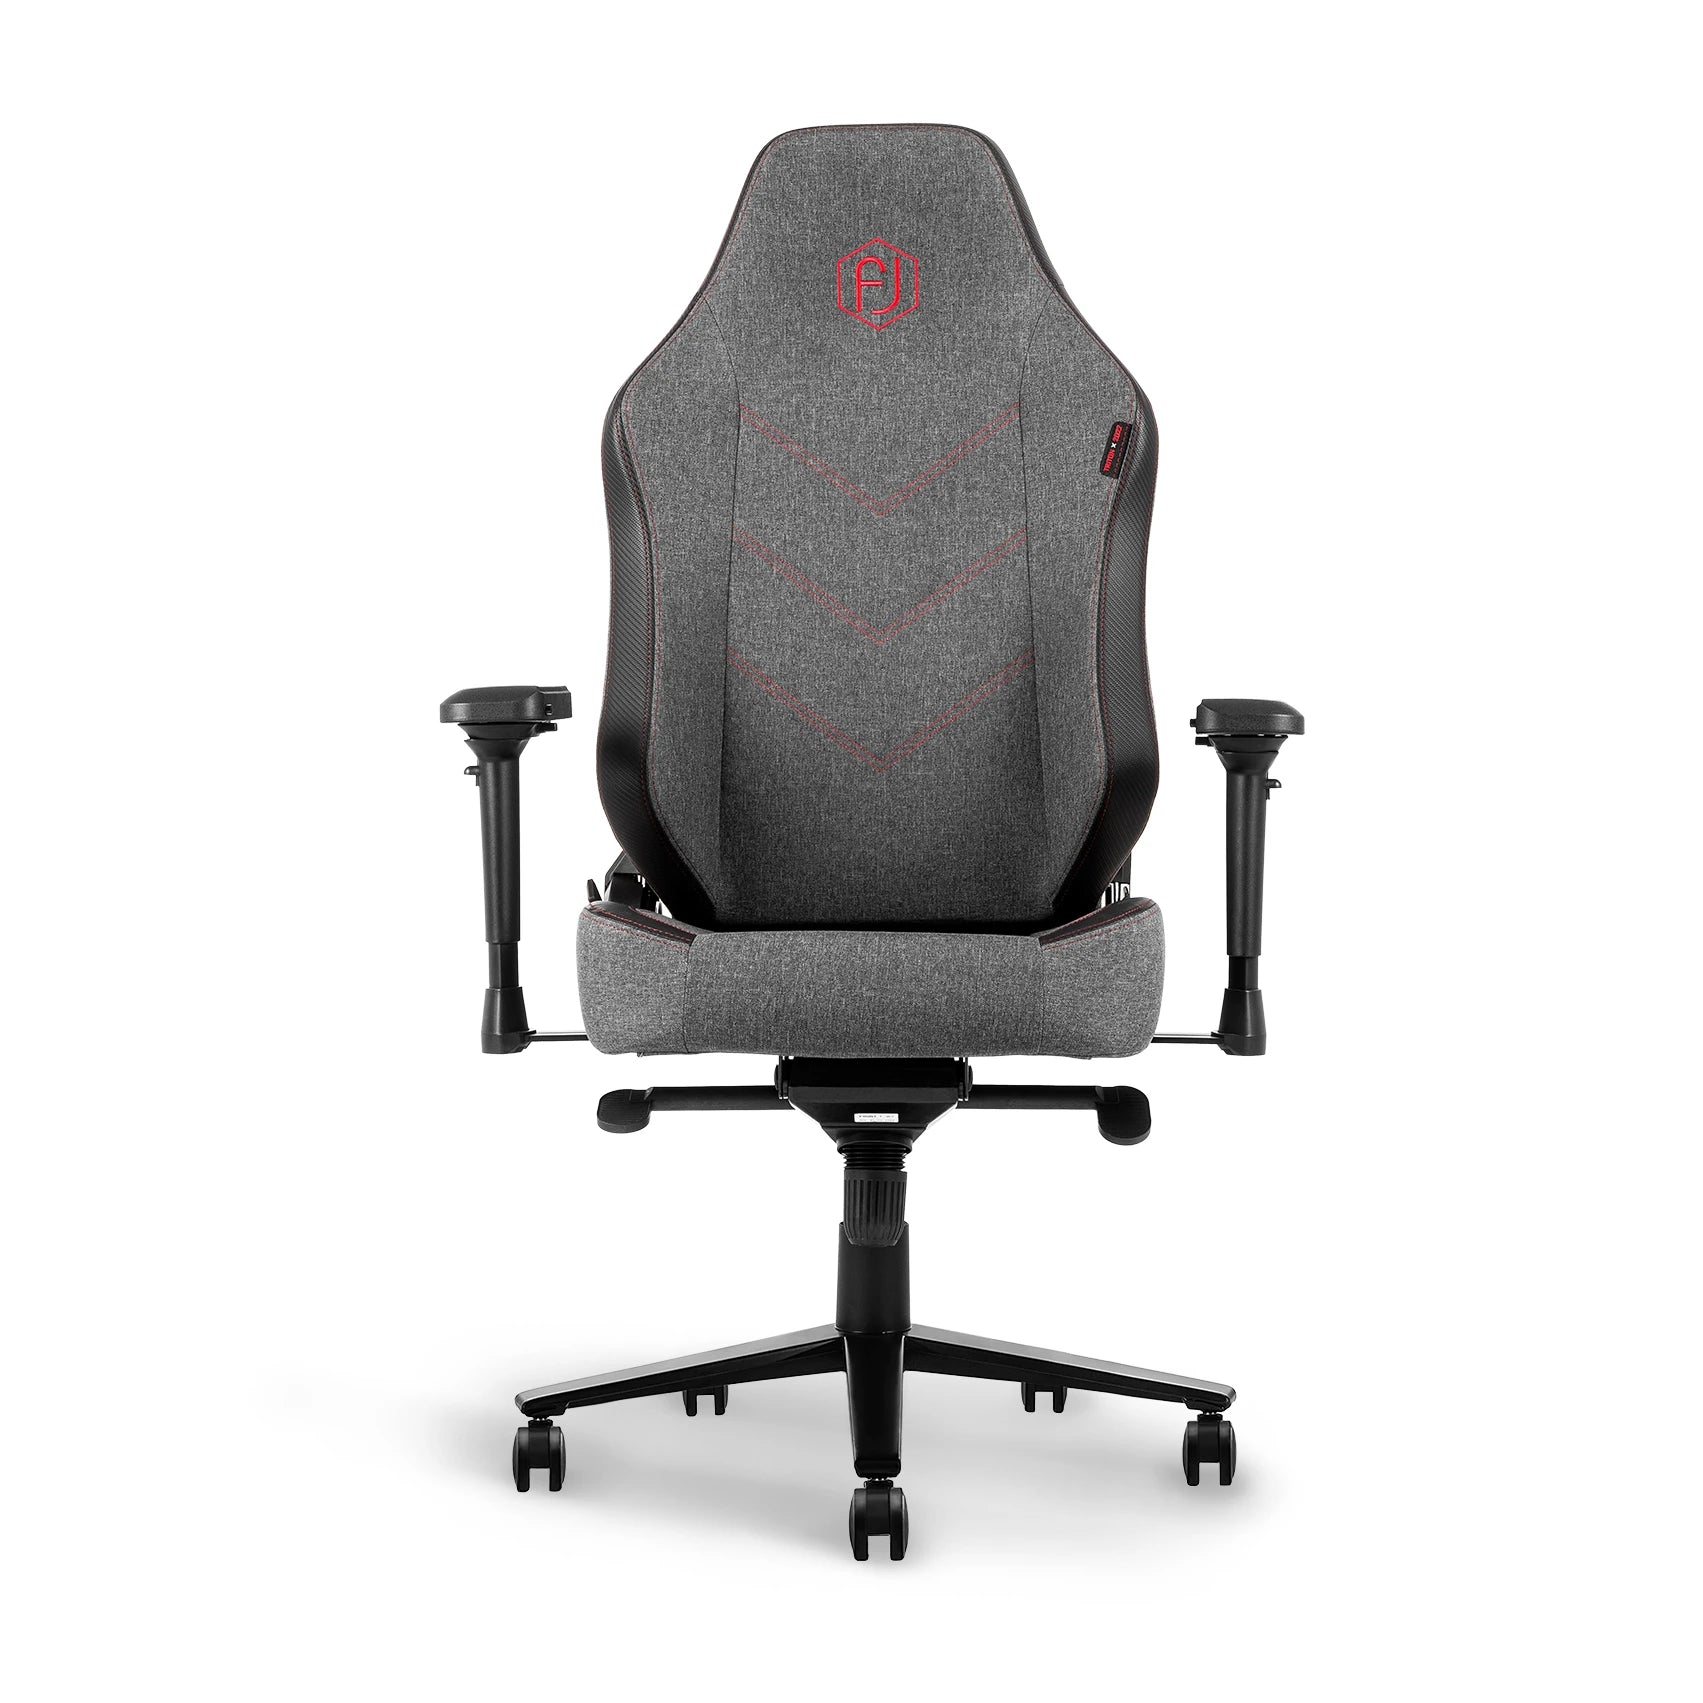 Heather grey ergonomic chair with unique stitching pattern and comfortable backrest, frontal view.